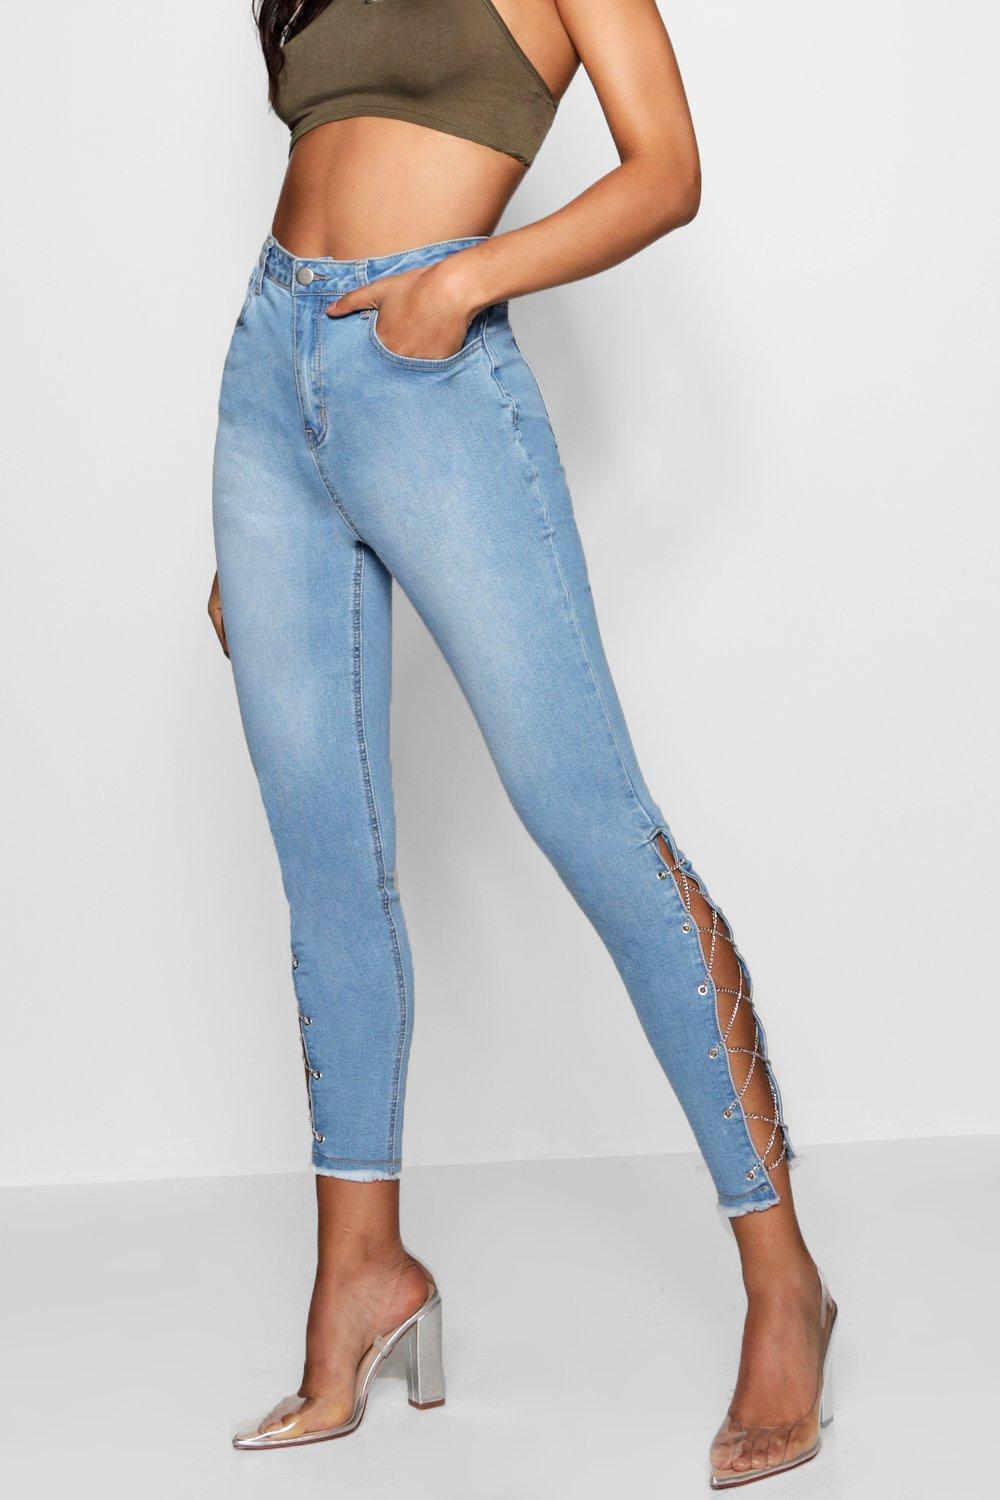 lace up jeans side